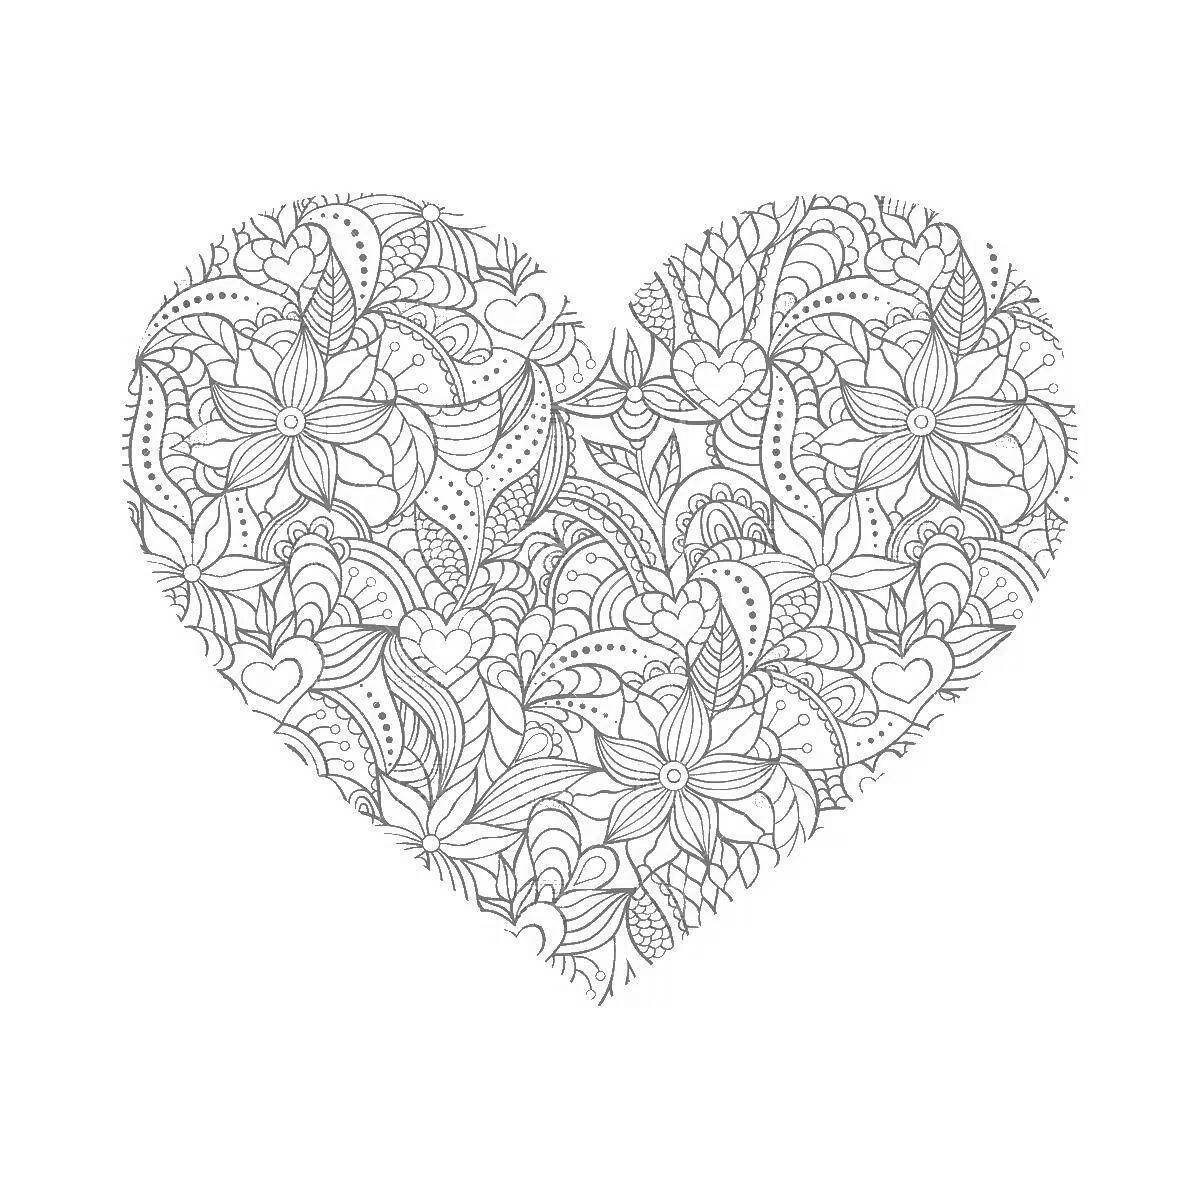 Intricate intricate heart coloring page